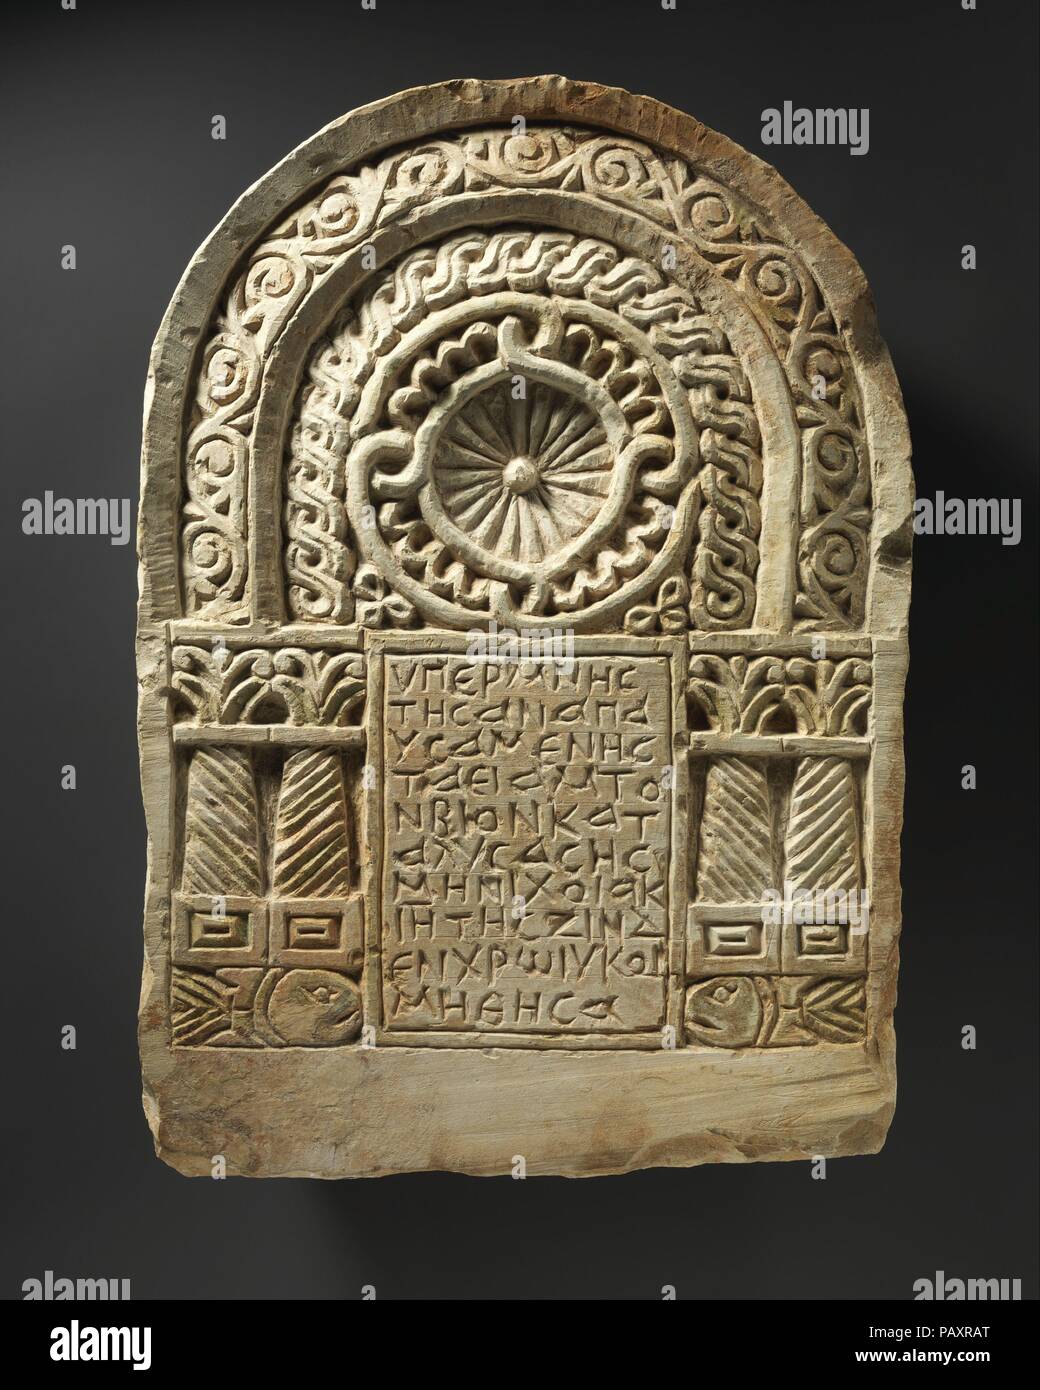 Funerary Stele with Architectural Frame. Dimensions: H. 20 11/16 in. (52.5 cm)  W. 14 9/16 in. (37 cm). Date: 6th-7th century.  Funerary stelae from the Byzantine period in Egypt, carved in stone and usually painted, were permanent monuments to the deceased. While normally embedded in walls or floors near the tomb, some were part of larger structures. Their decorations include scenes of paradise and symbols of the Christian Church. This example, said to be from the Upper Nile Delta town of Armant, bears the name of a prominent citizen who was buried near the marker. Museum: Metropolitan Museum Stock Photo